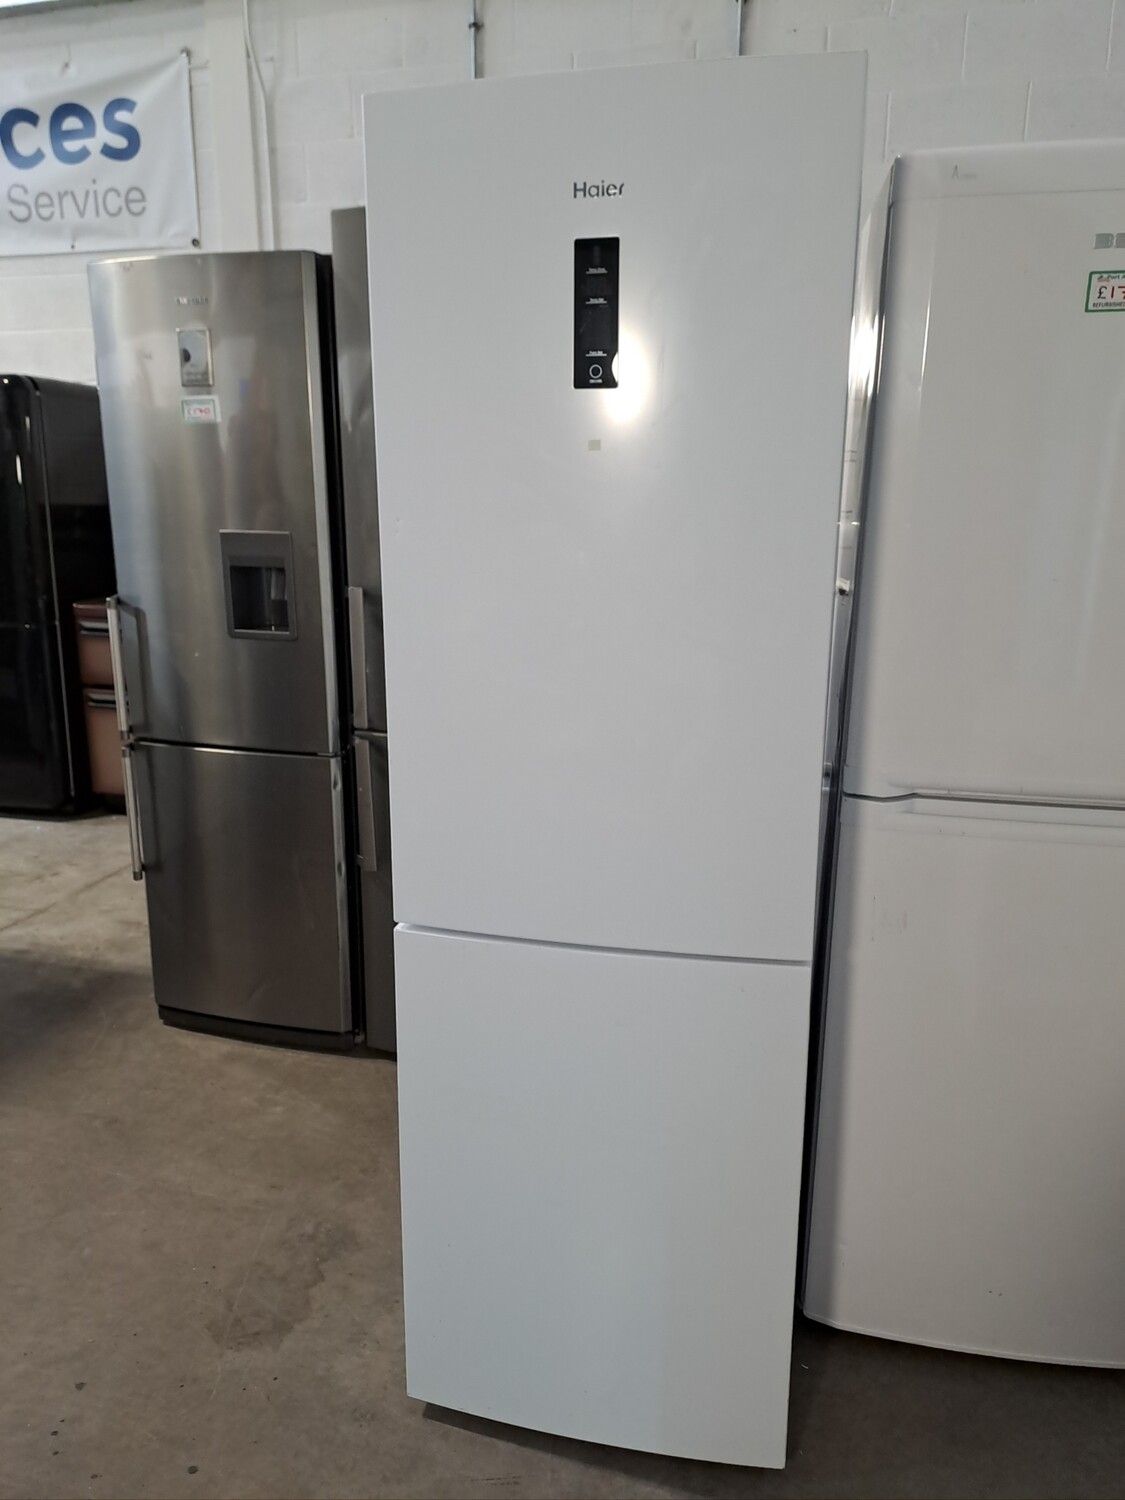 Haier C2FE636CWJ Frost Free Fridge Freezer White H192 x W60 X D66 Refurbished 6 Month Guarantee. This item is located in our Whitby Road Shop 